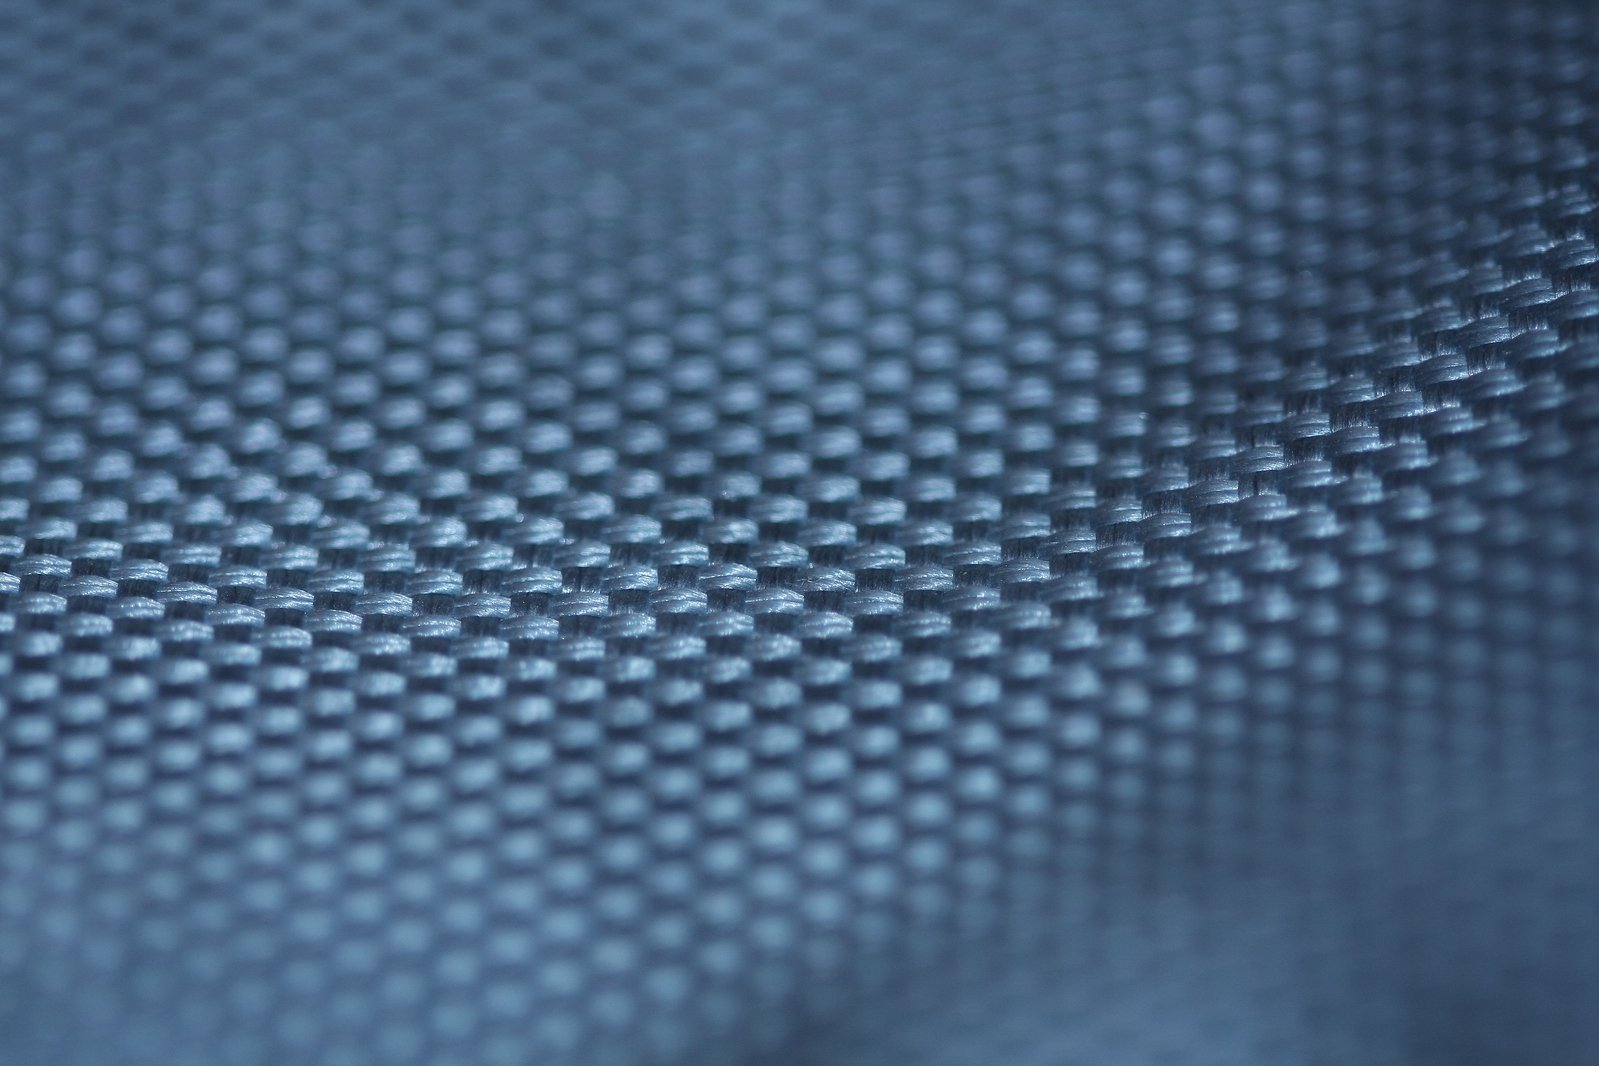 a background of blue, light blue and light grey woven material